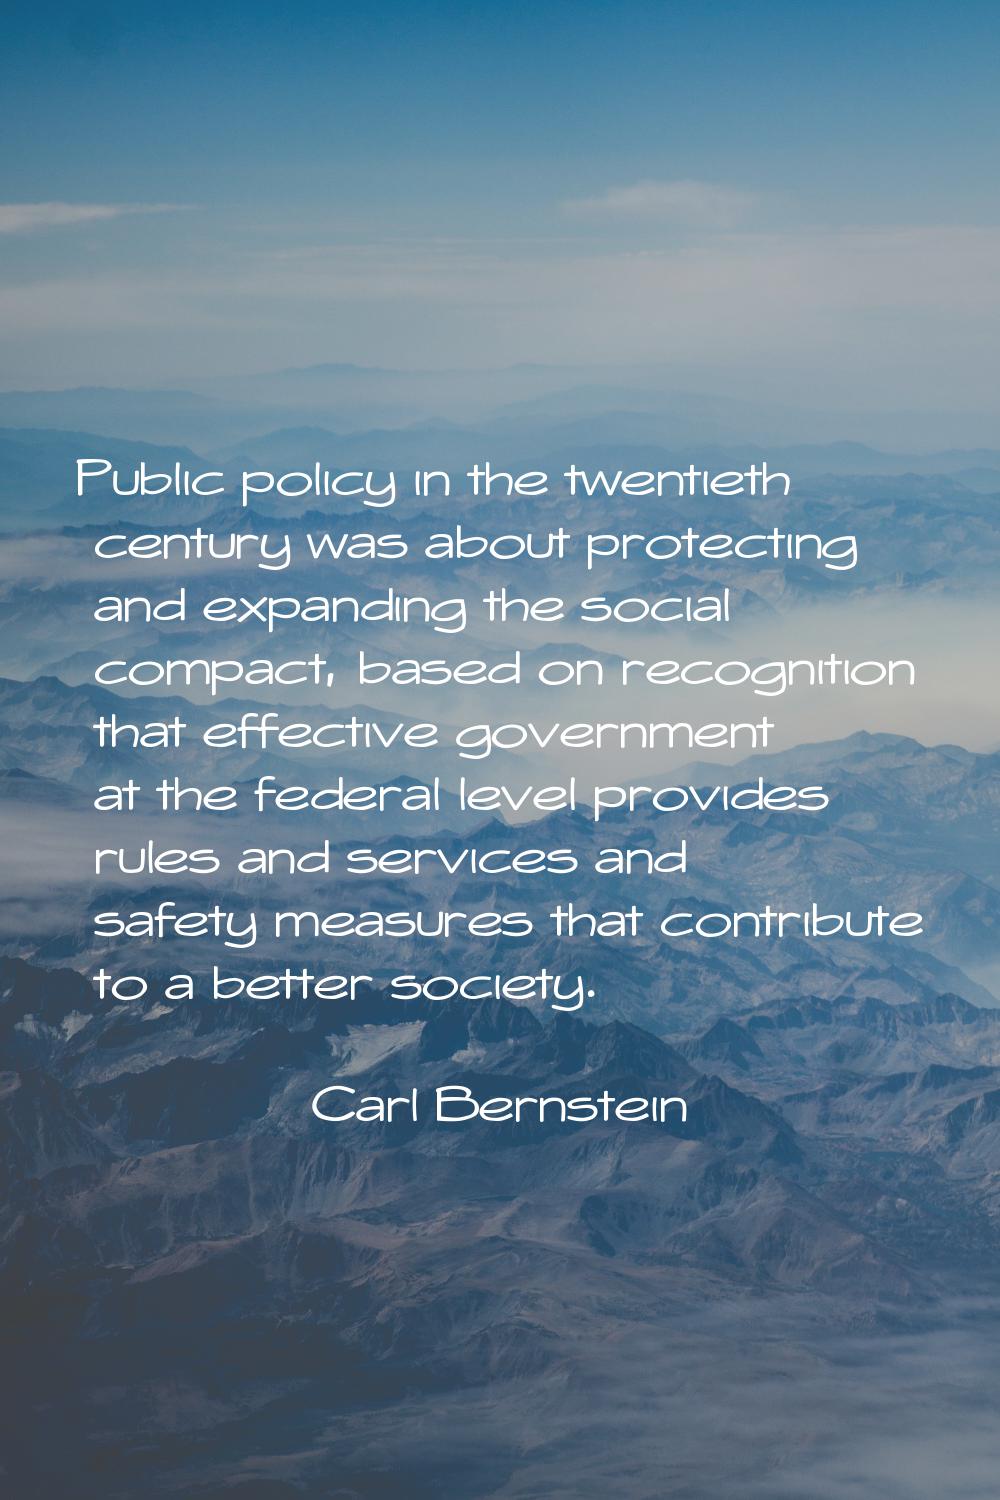 Public policy in the twentieth century was about protecting and expanding the social compact, based